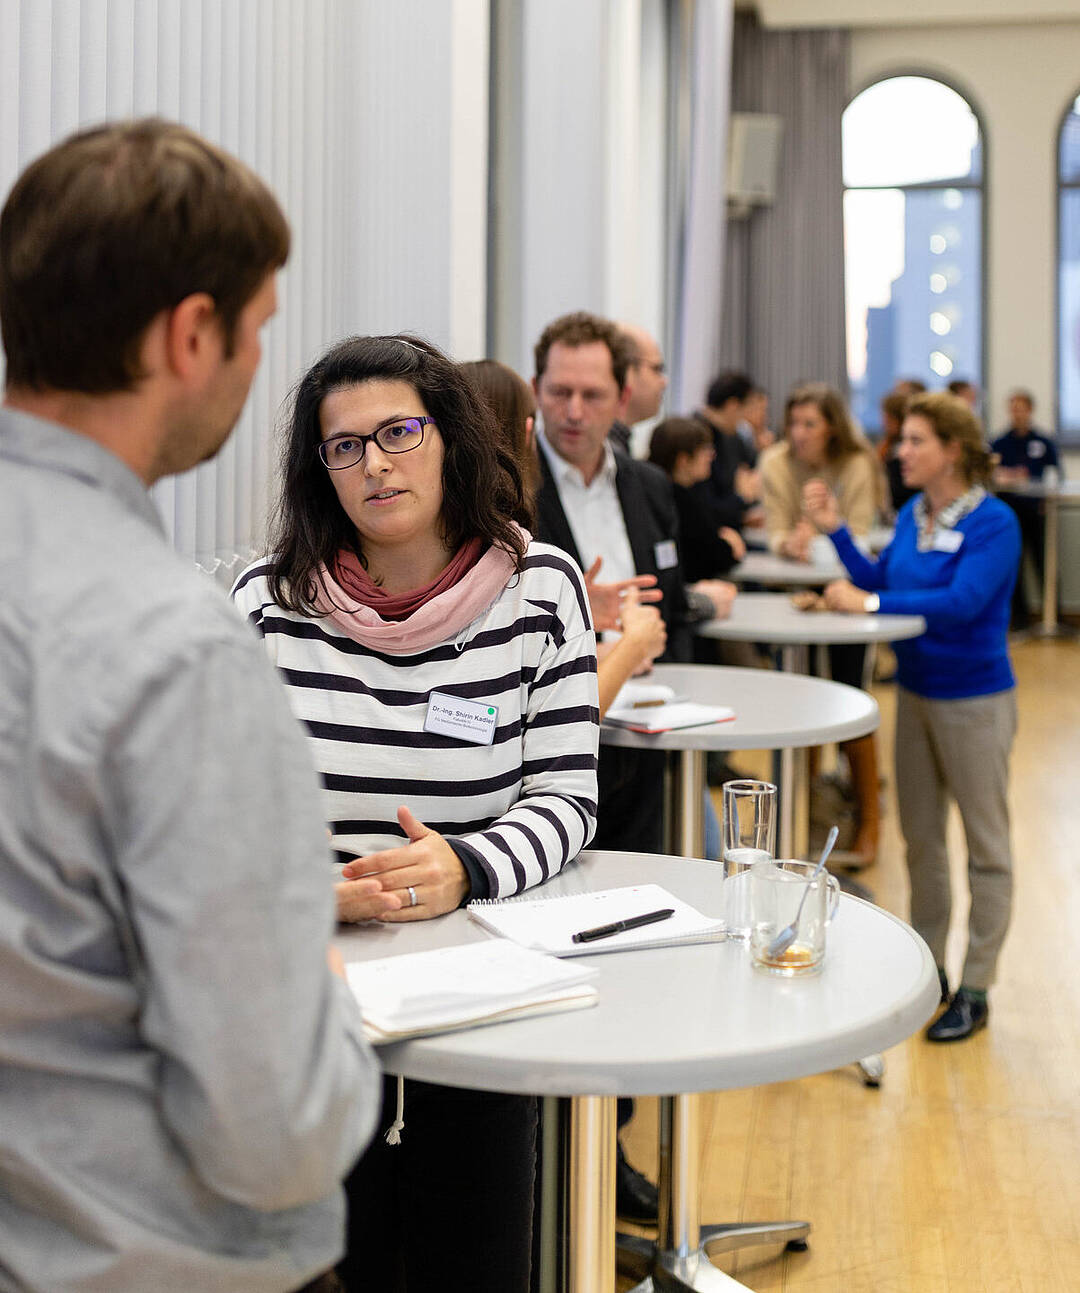 TU Berlin scientists at a speed-dating event